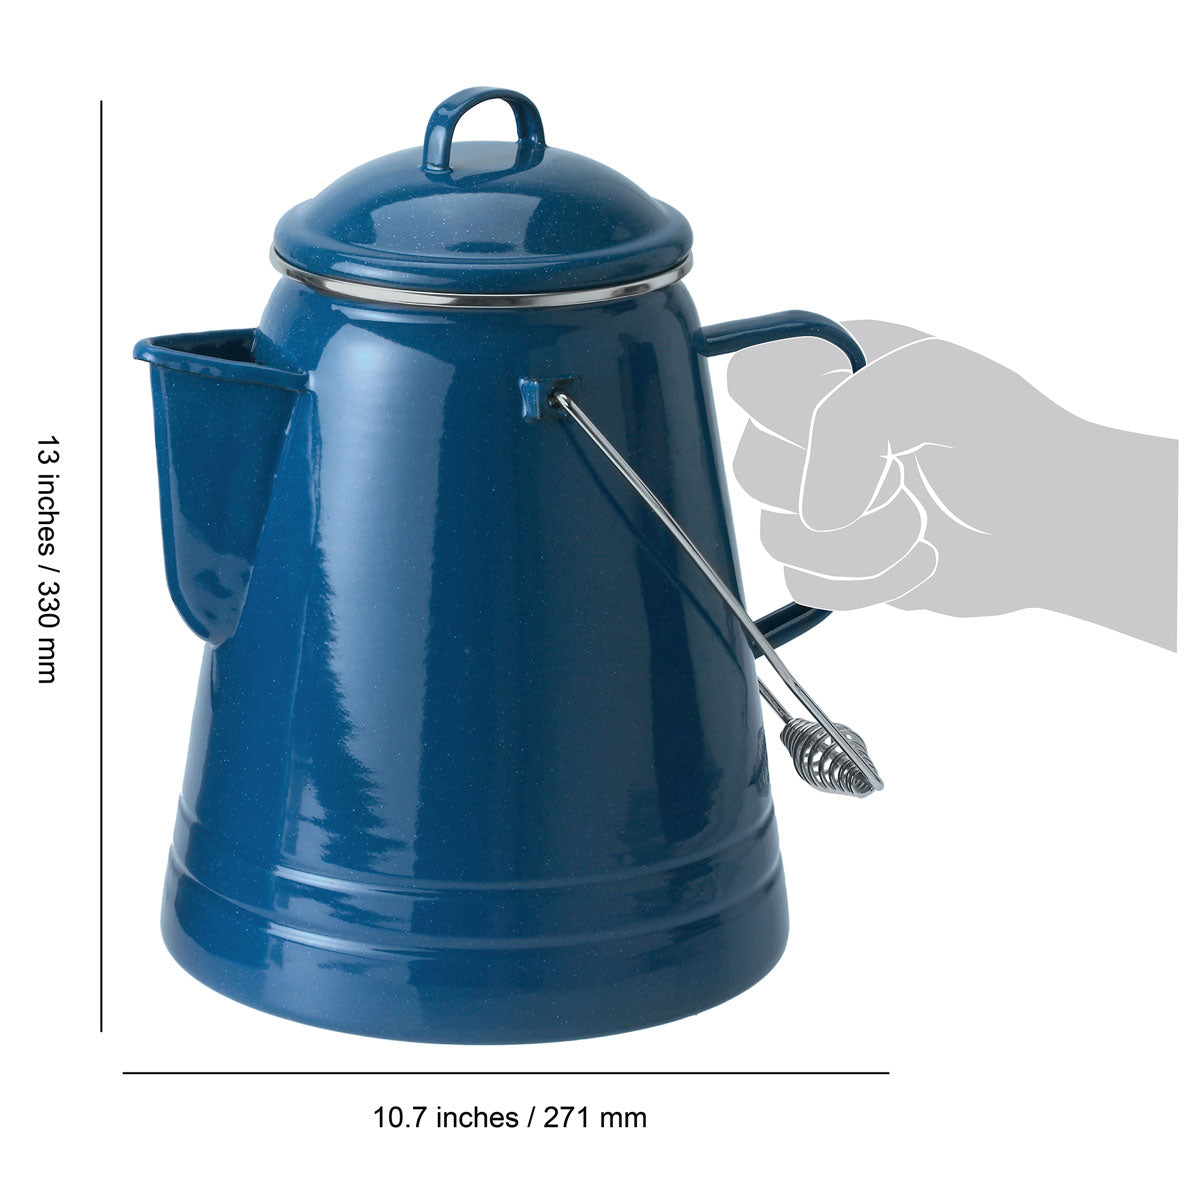 Granite Ware 3 qt Coffee Boiler. Enameled Steel 12 Cups Capacity. Perfect for Camping, Heat Coffee, Tea and Water Directly on Stove or Fire.